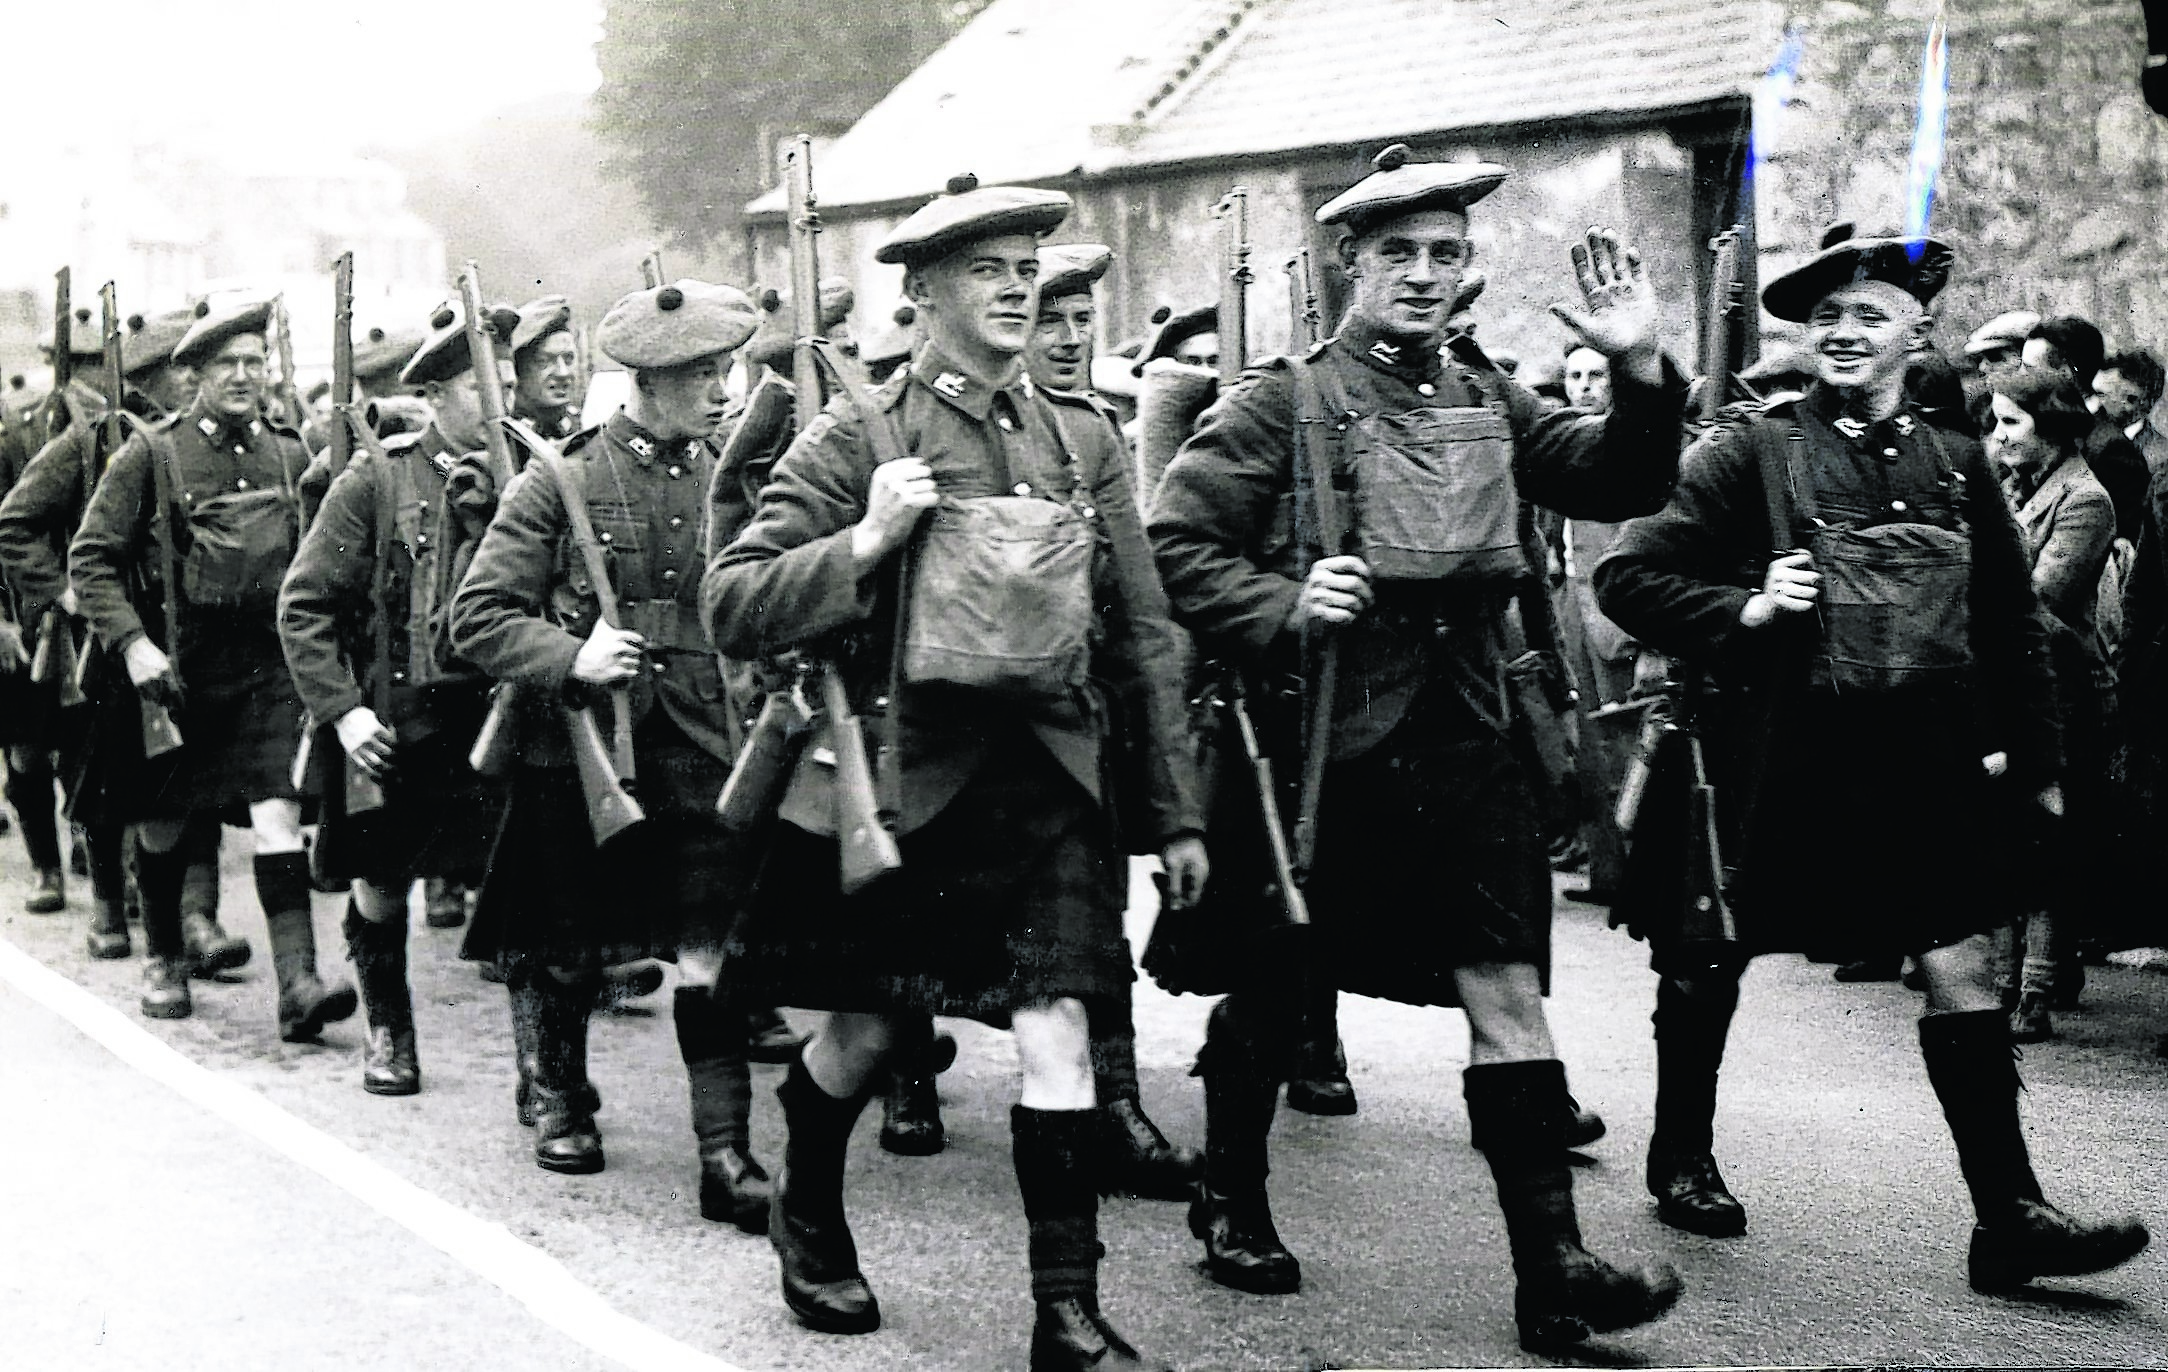 The troops march off to St Valery. Photo courtesy of Gordon Highlanders Museum